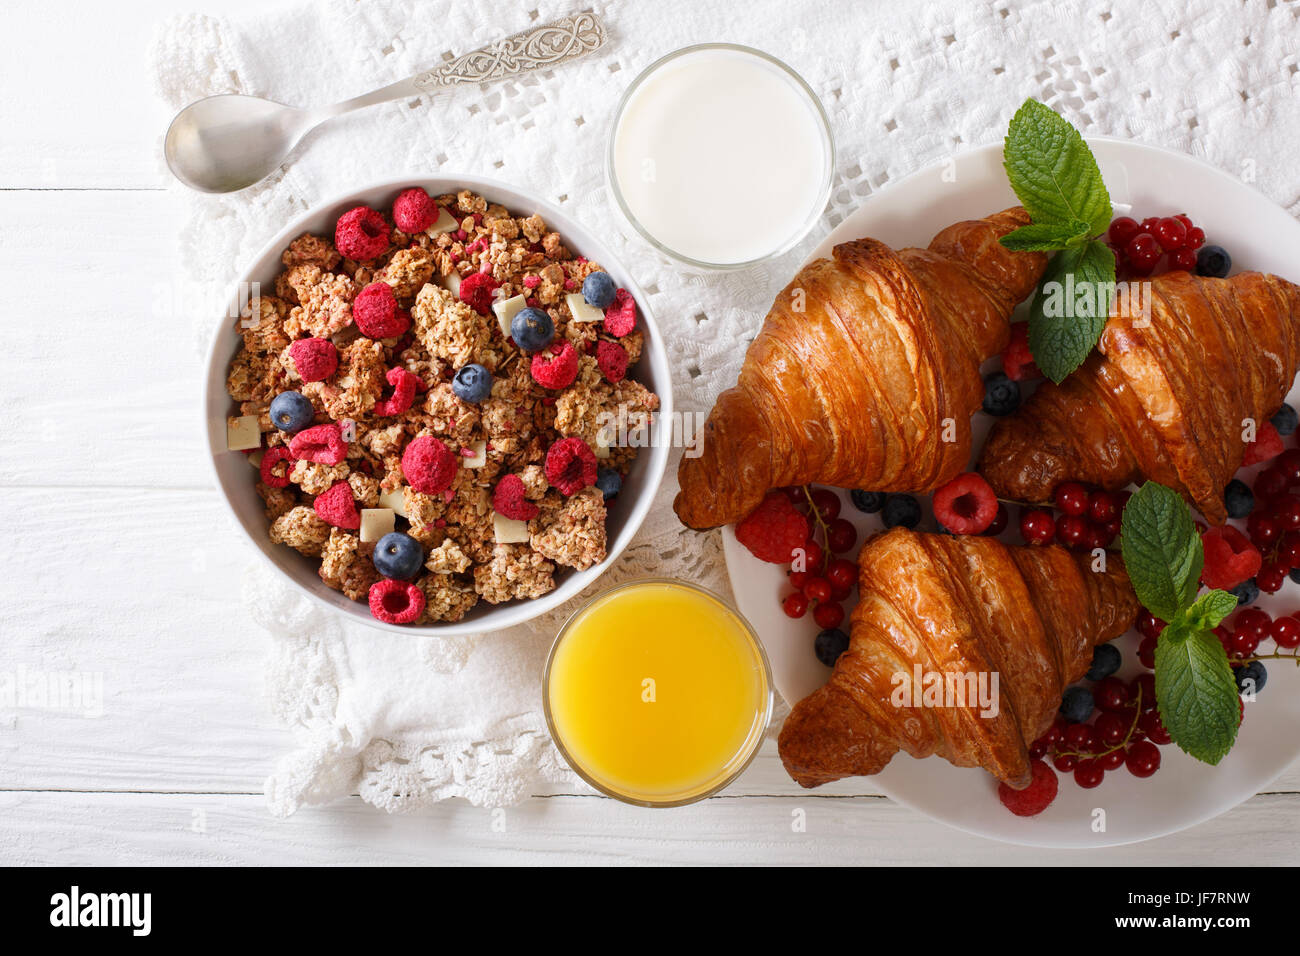 Muesli with berries and croissants, milk and orange juice close-up on the table. horizontal view from above Stock Photo